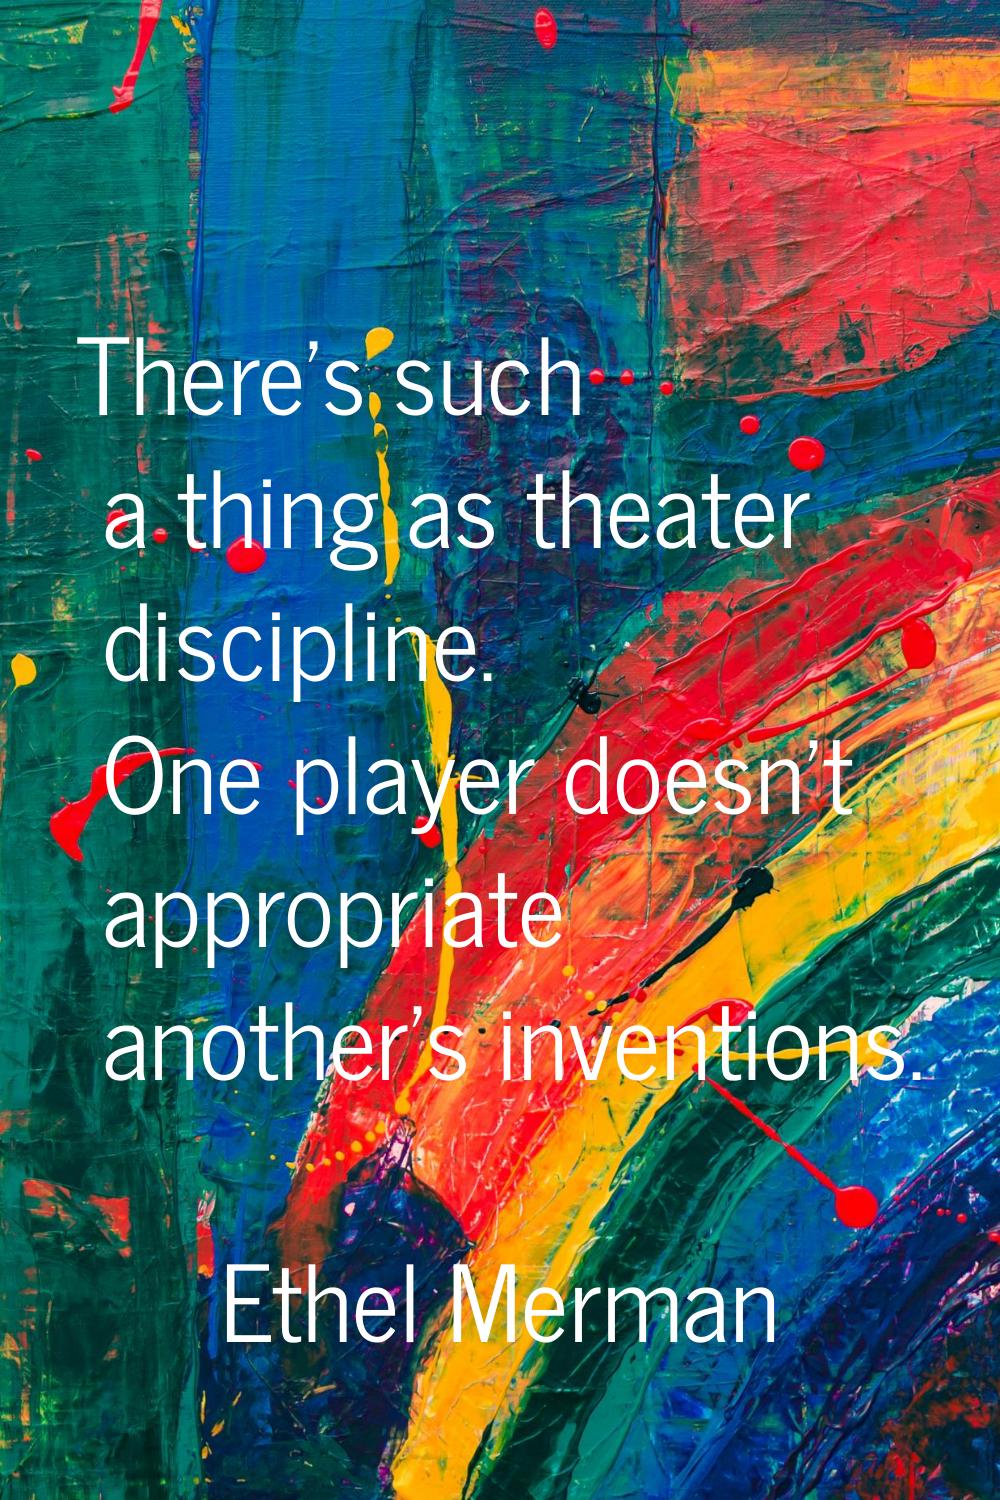 There's such a thing as theater discipline. One player doesn't appropriate another's inventions.